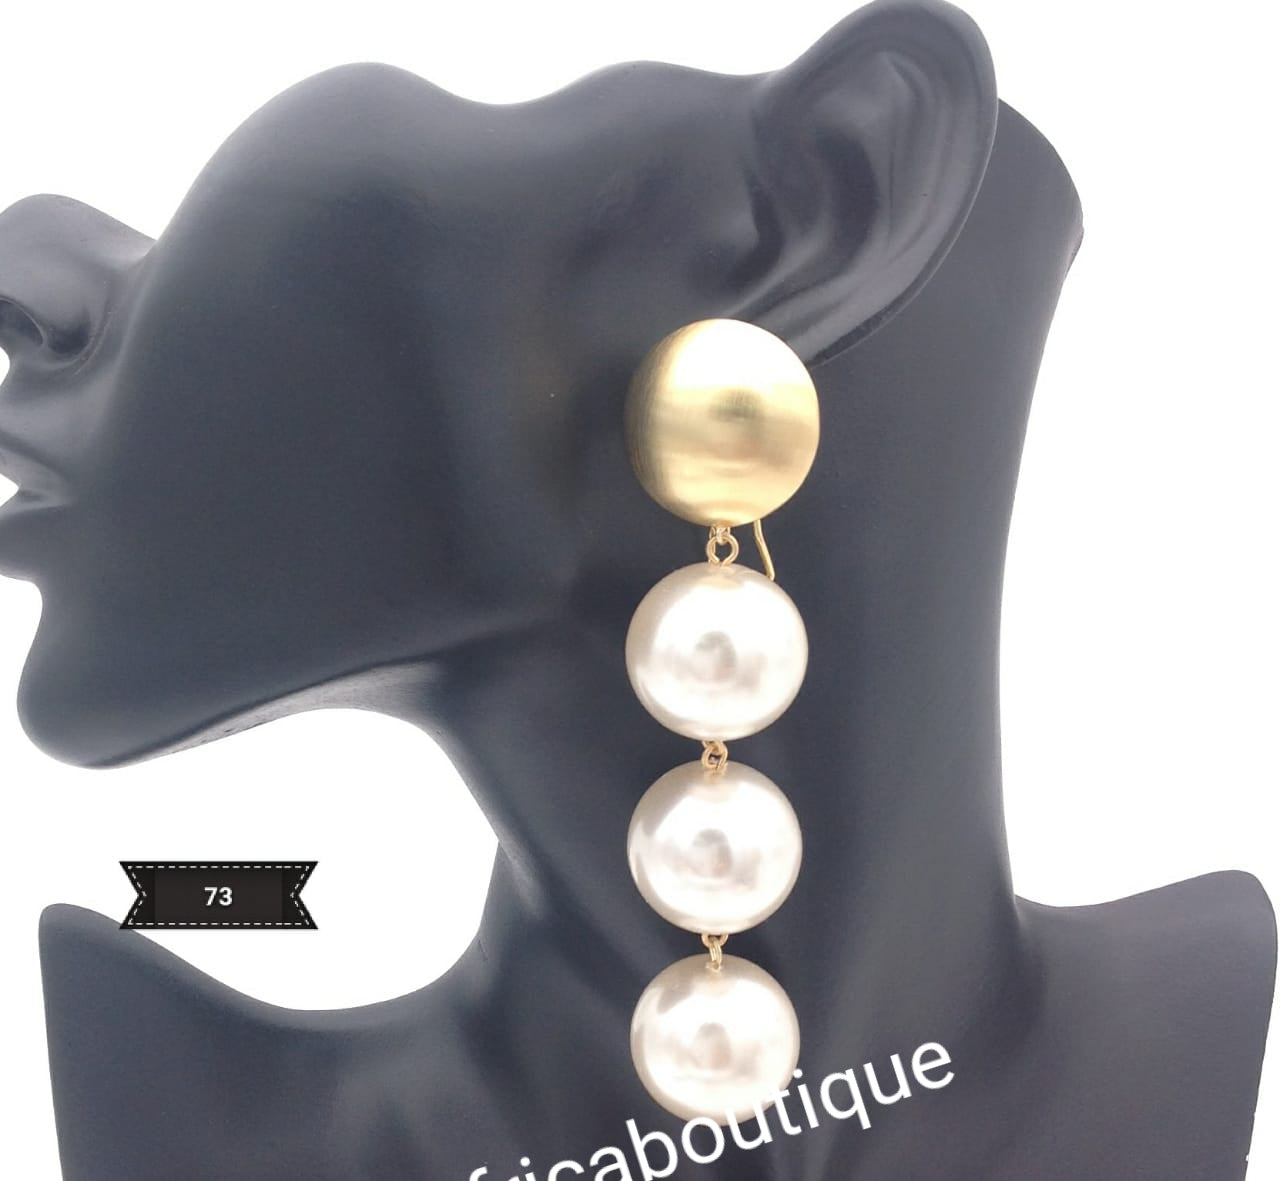 Latest drop-earrings in gold and white pearls. Top quality made hypoallergenic